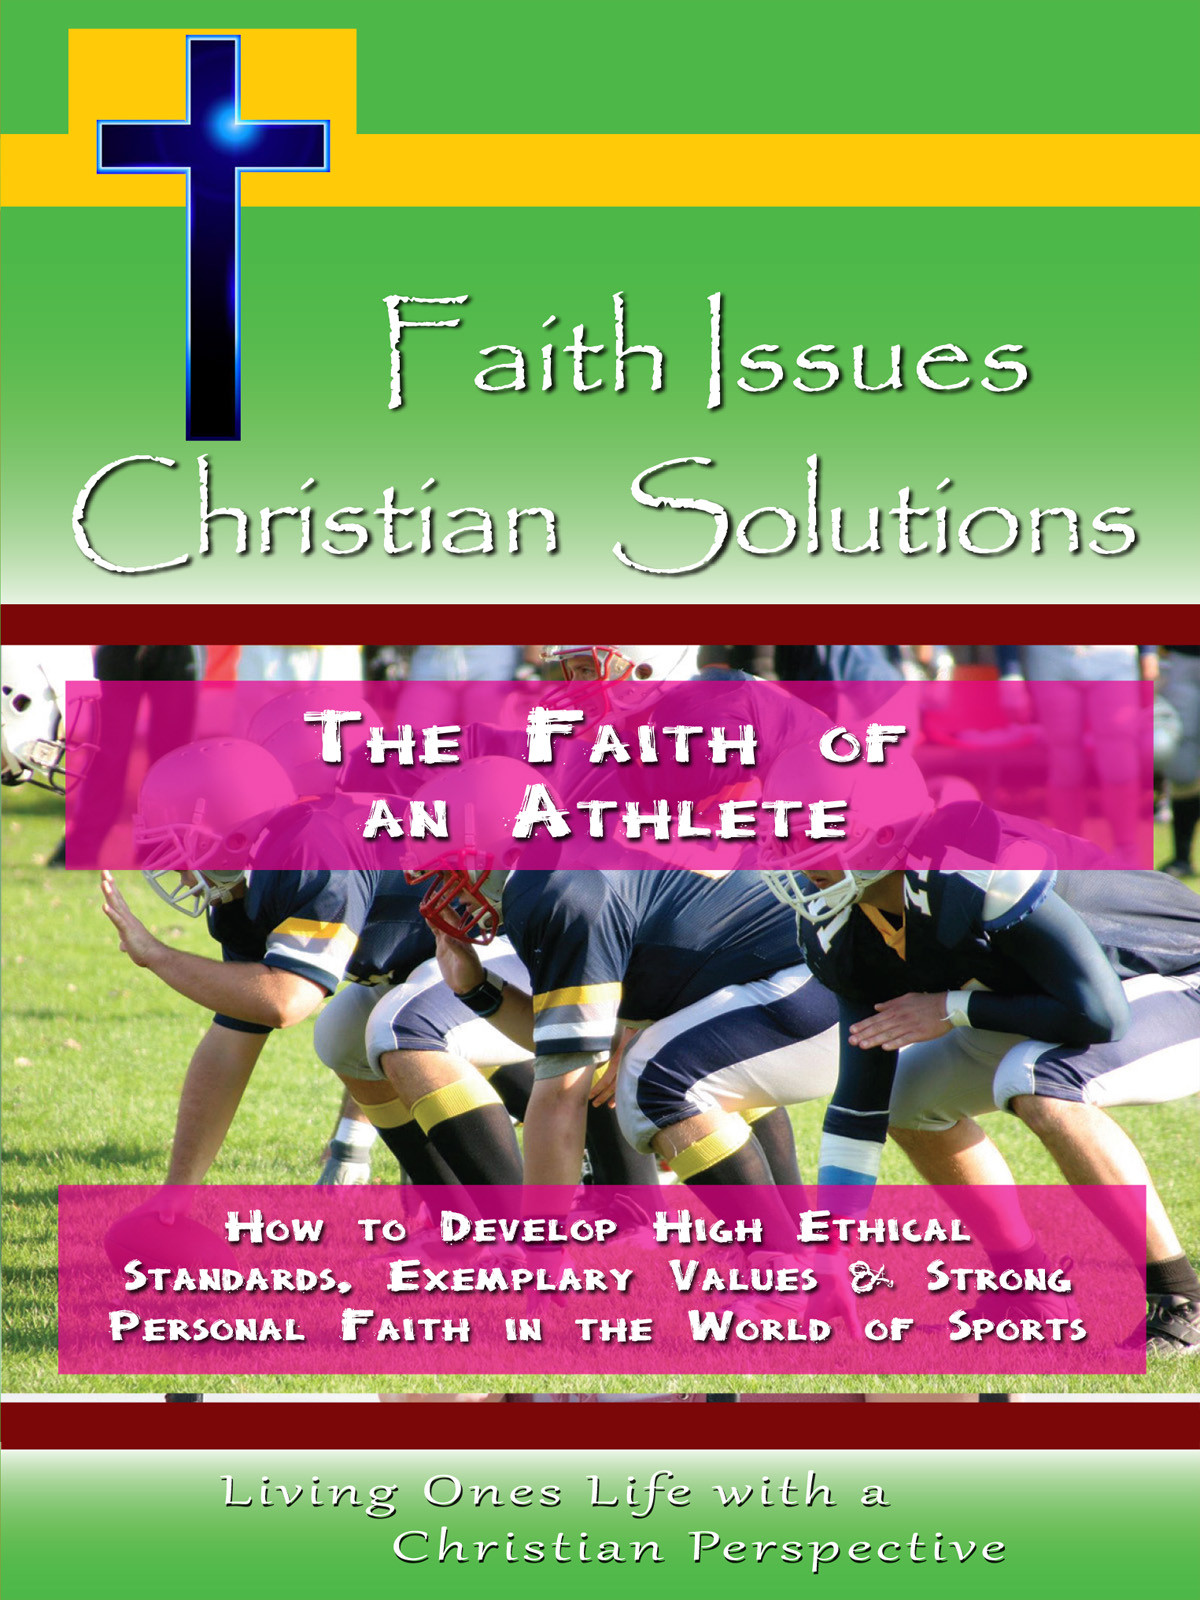 CH10037 - The Faith of an Athlete How to Develop High Ethical Standards, Exemplary Values & Strong Personal Faith in the World of Sports